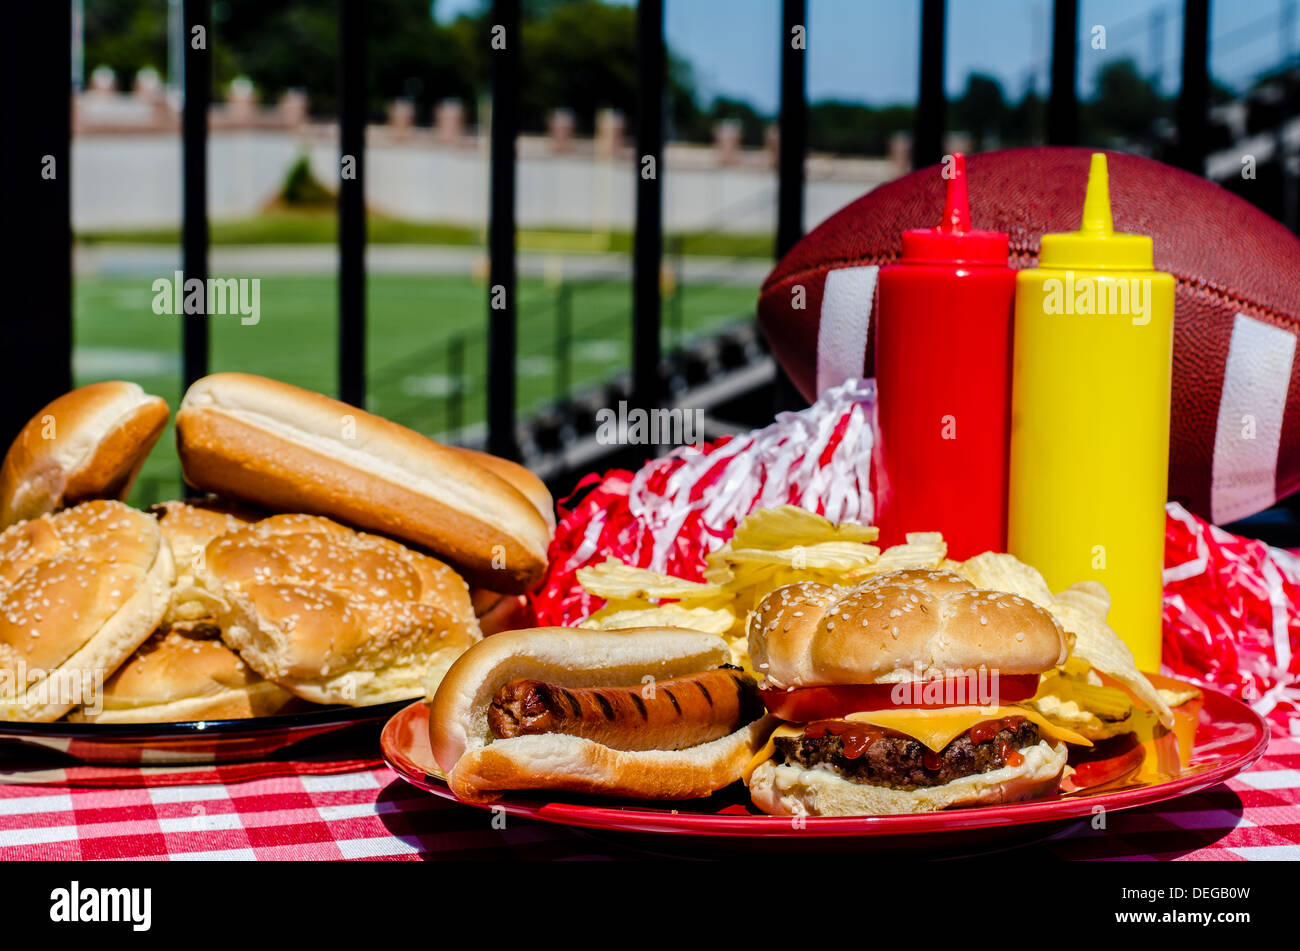 Football party with cheeseburger, hot dog, potato chips, pom poms, buns, and football. Football field in background. Stock Photo